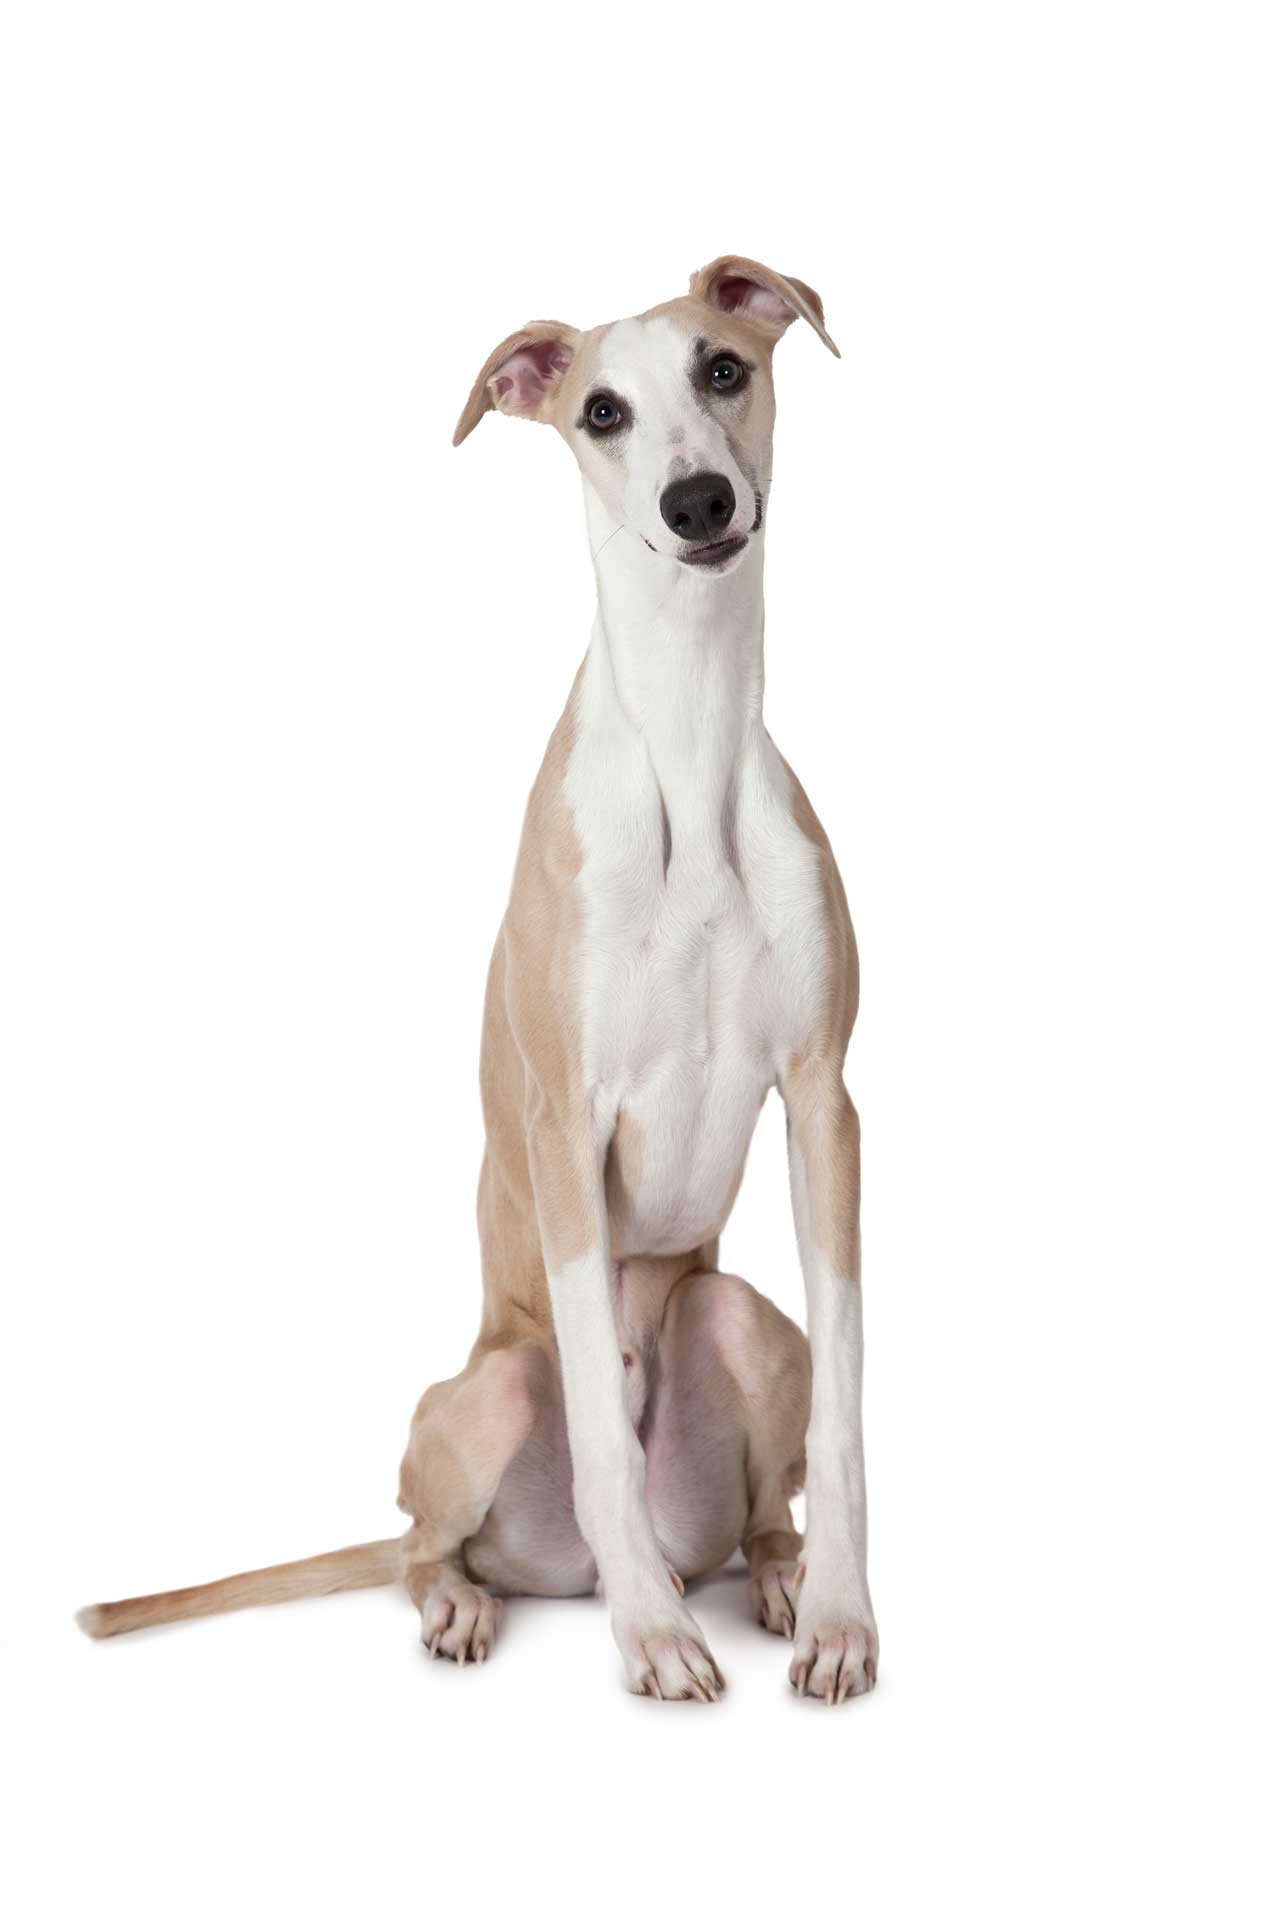 Whippet Dog Breed » Everything About Whippet